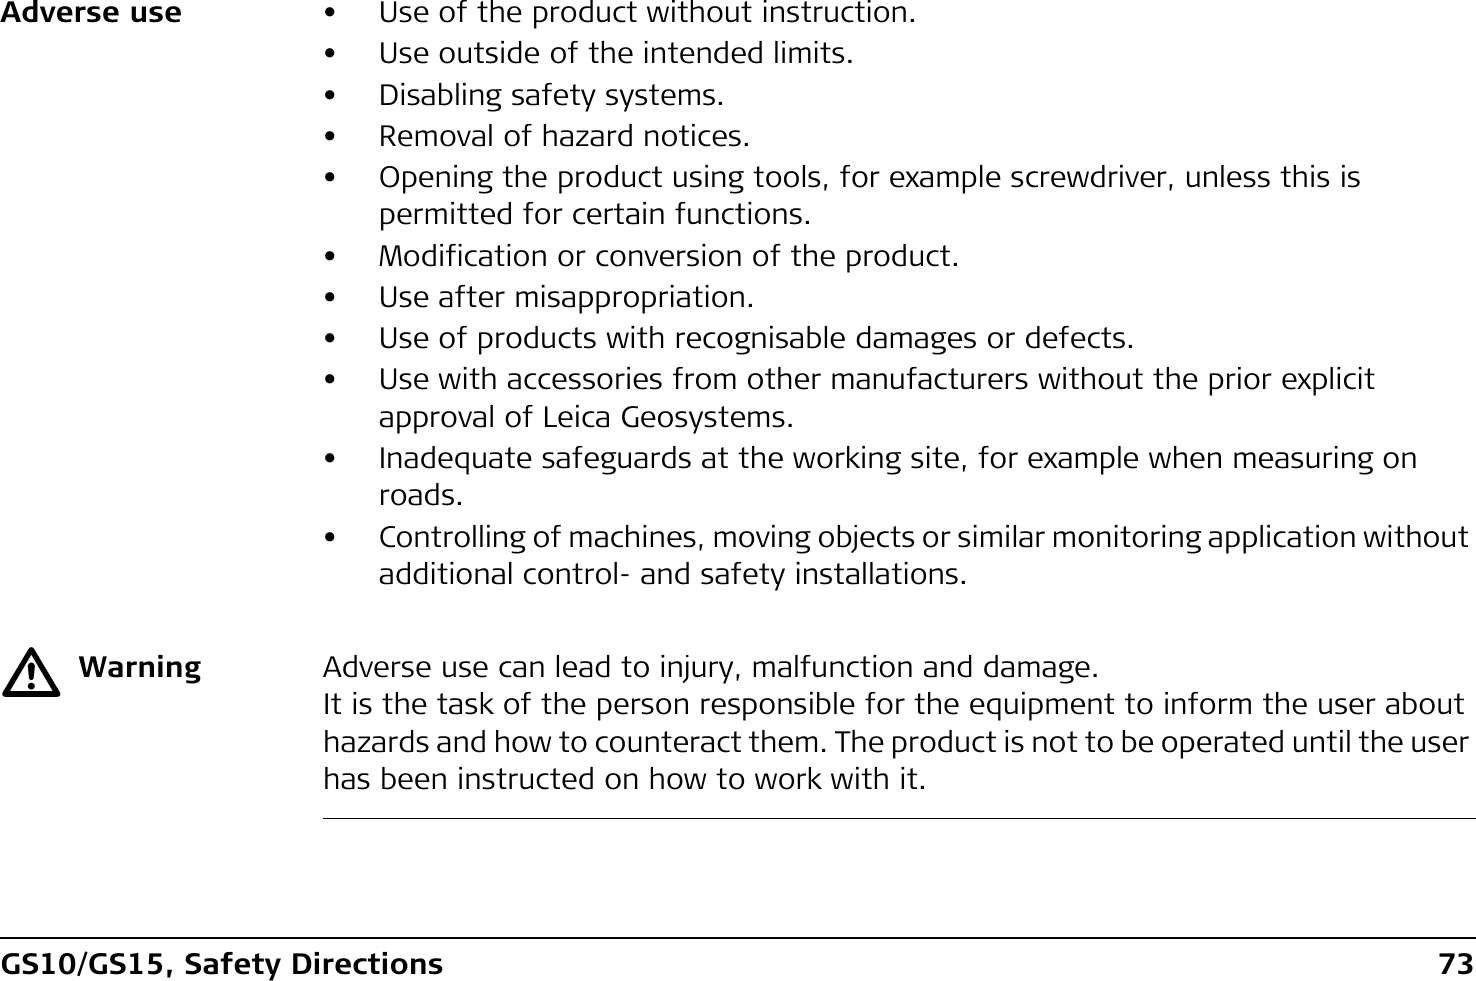 GS10/GS15, Safety Directions 73Adverse use • Use of the product without instruction.• Use outside of the intended limits.• Disabling safety systems.• Removal of hazard notices.• Opening the product using tools, for example screwdriver, unless this is permitted for certain functions.• Modification or conversion of the product.• Use after misappropriation.• Use of products with recognisable damages or defects.• Use with accessories from other manufacturers without the prior explicit approval of Leica Geosystems.• Inadequate safeguards at the working site, for example when measuring on roads.• Controlling of machines, moving objects or similar monitoring application without additional control- and safety installations.ƽWarning Adverse use can lead to injury, malfunction and damage.It is the task of the person responsible for the equipment to inform the user about hazards and how to counteract them. The product is not to be operated until the user has been instructed on how to work with it.